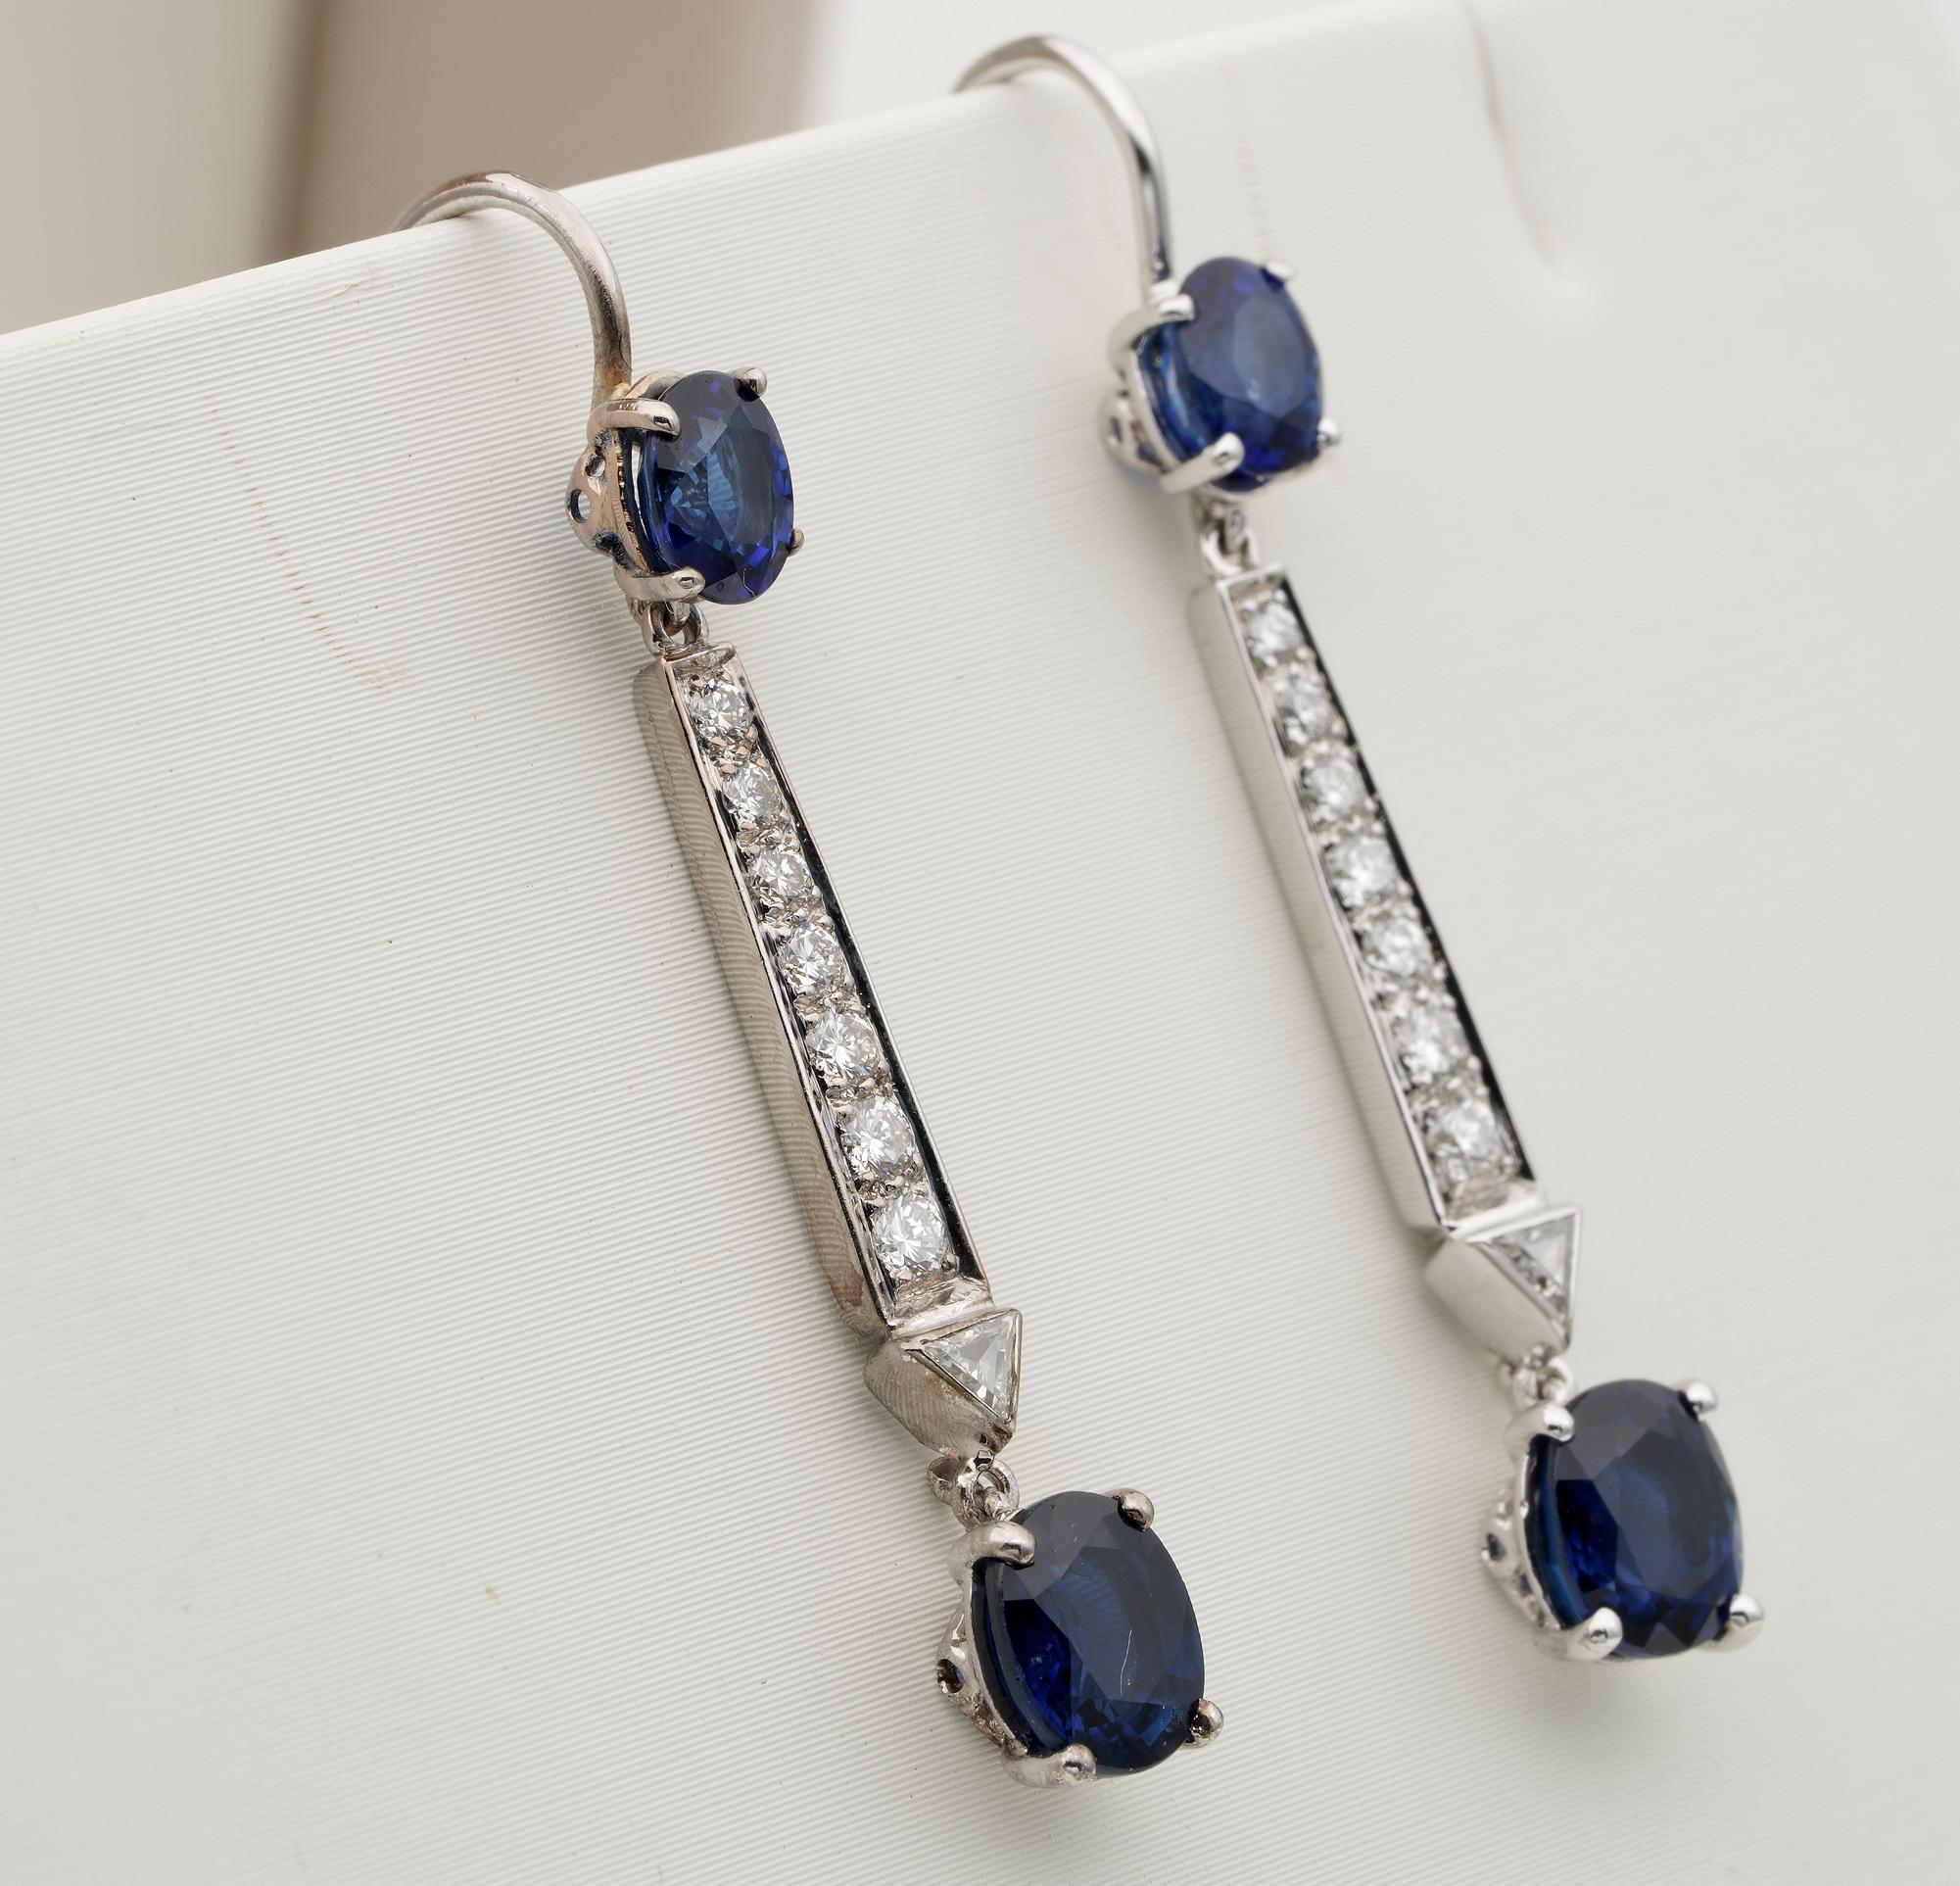 Dangly Sweetness
These lovely long drop earrings are 1940/45 ca
Still Art deco influenced, finely hand crafted as unique of solid 18 KT white gold
Simple effective style to be with you all the time and at any occasion
Long and eye catching on ears